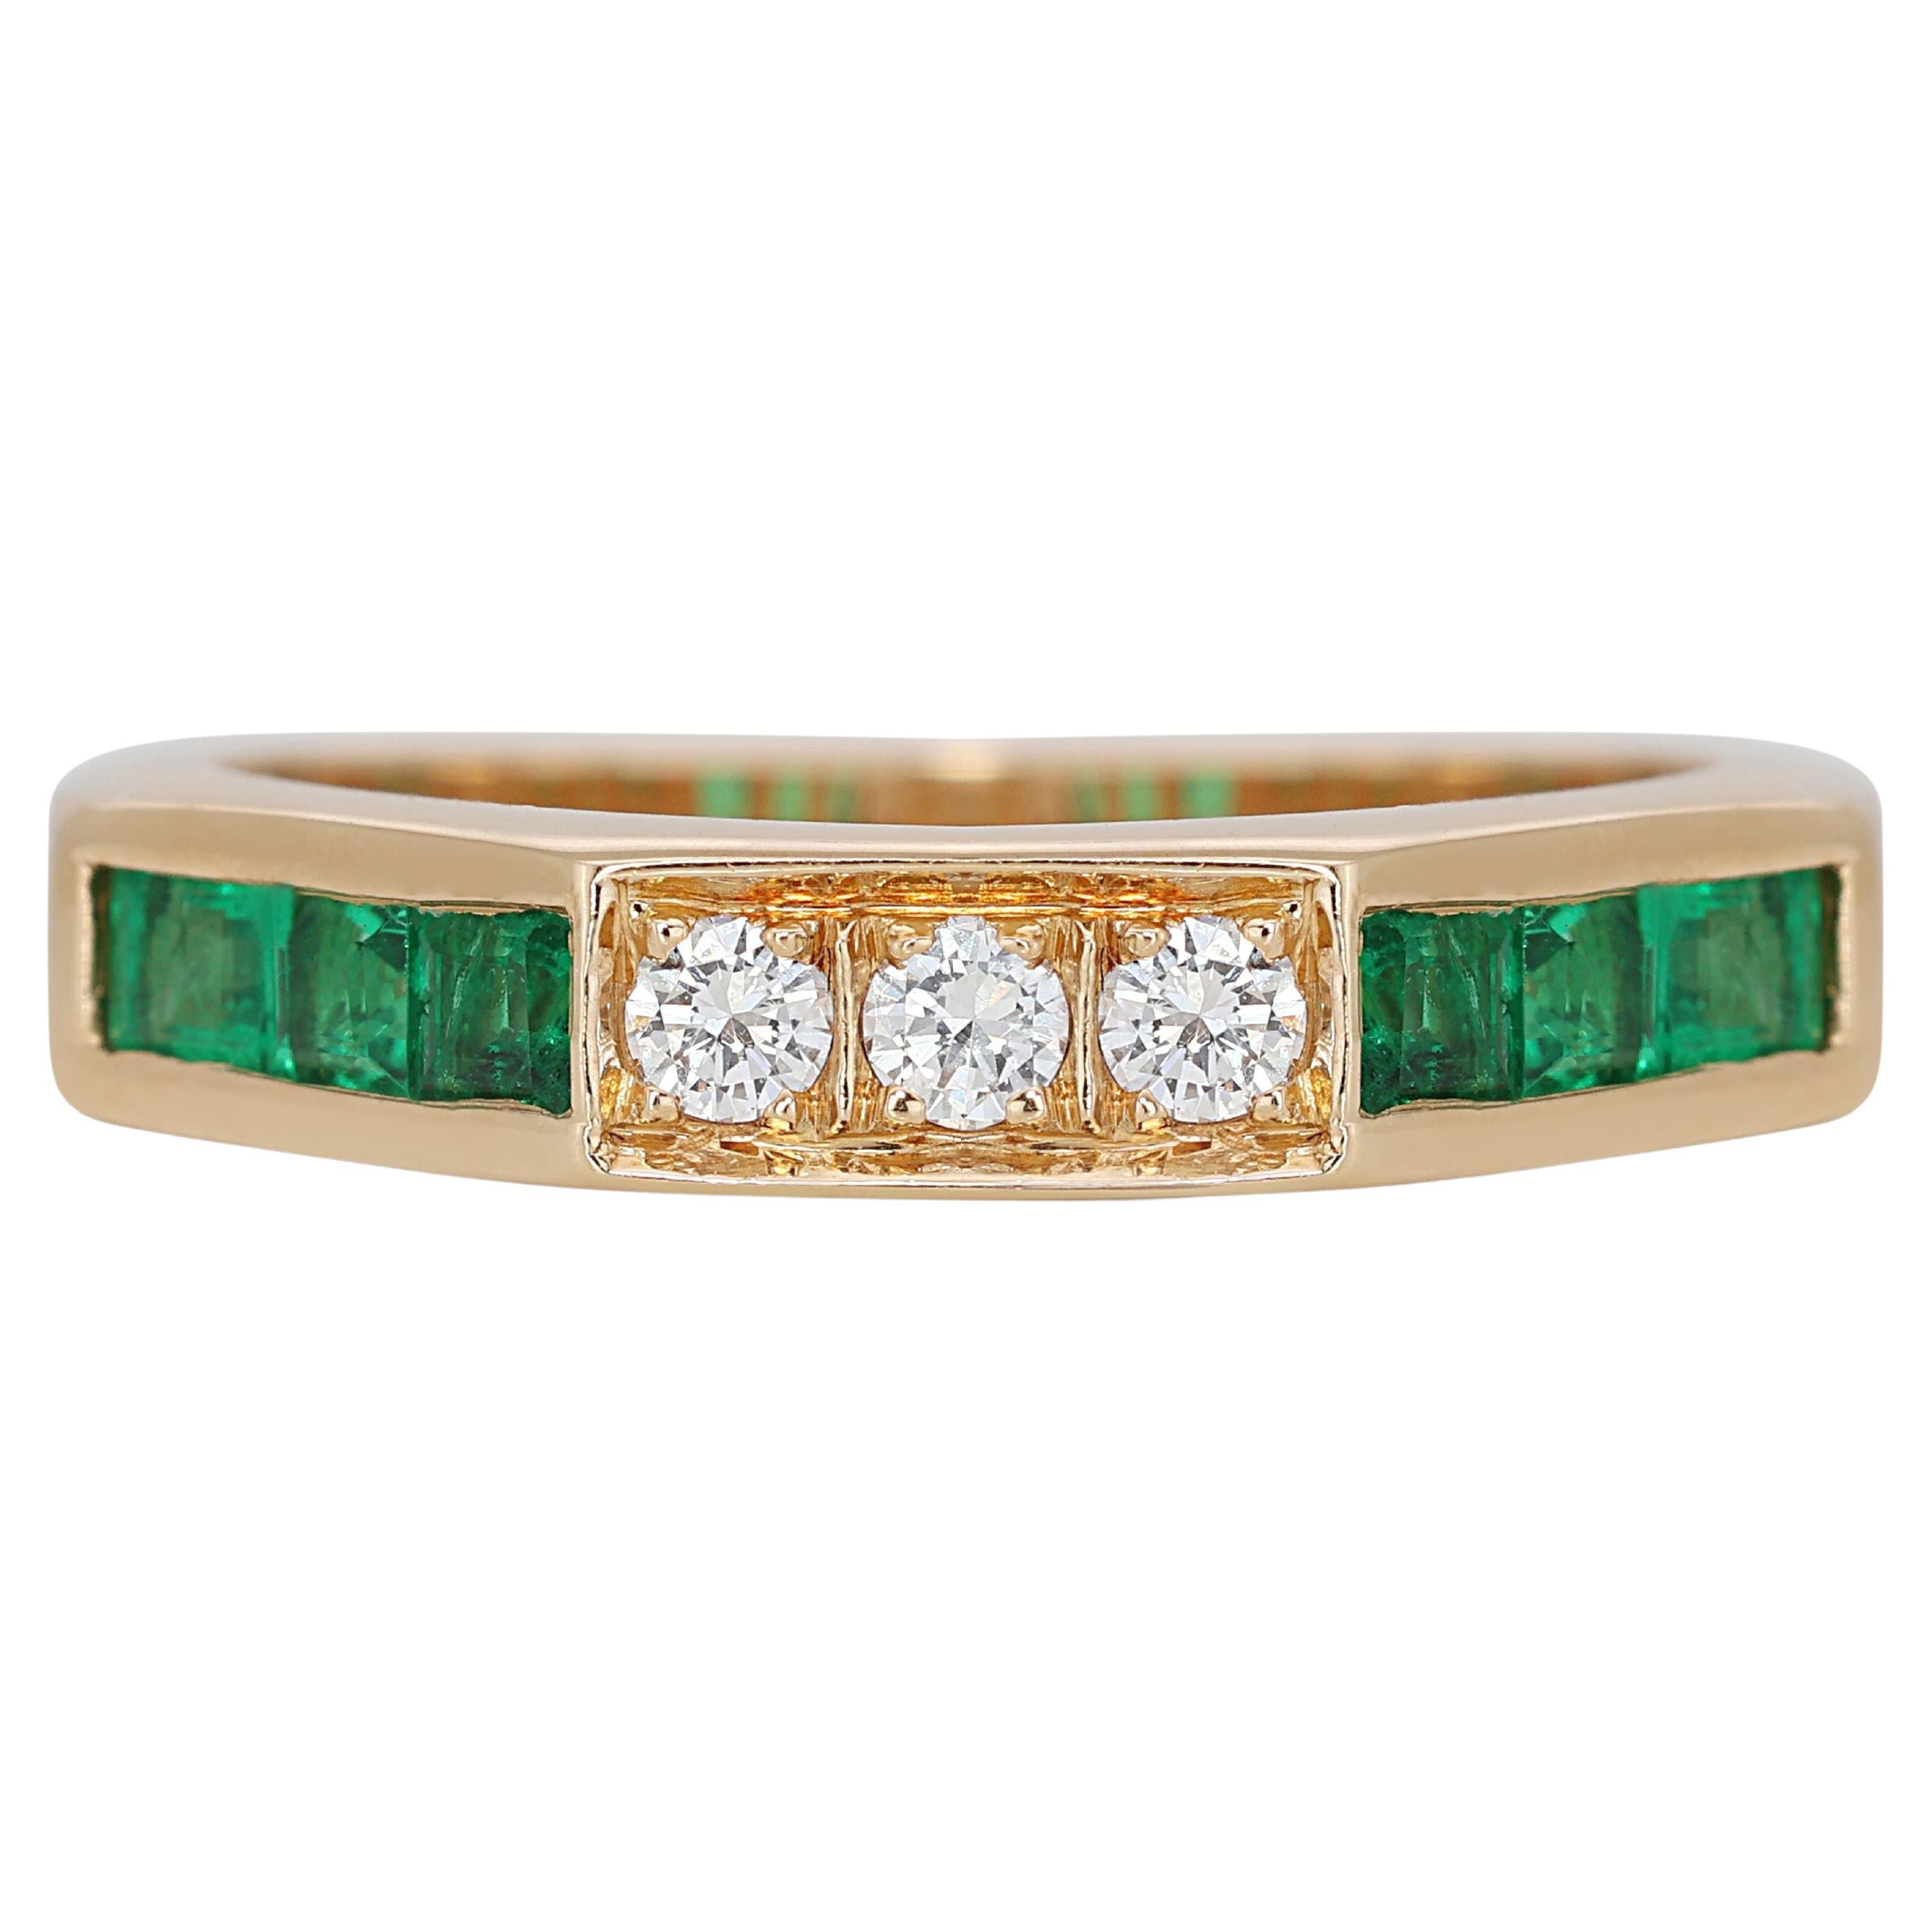 Beautiful 0.18ct Half Eternity Ring with Emeralds and Diamonds